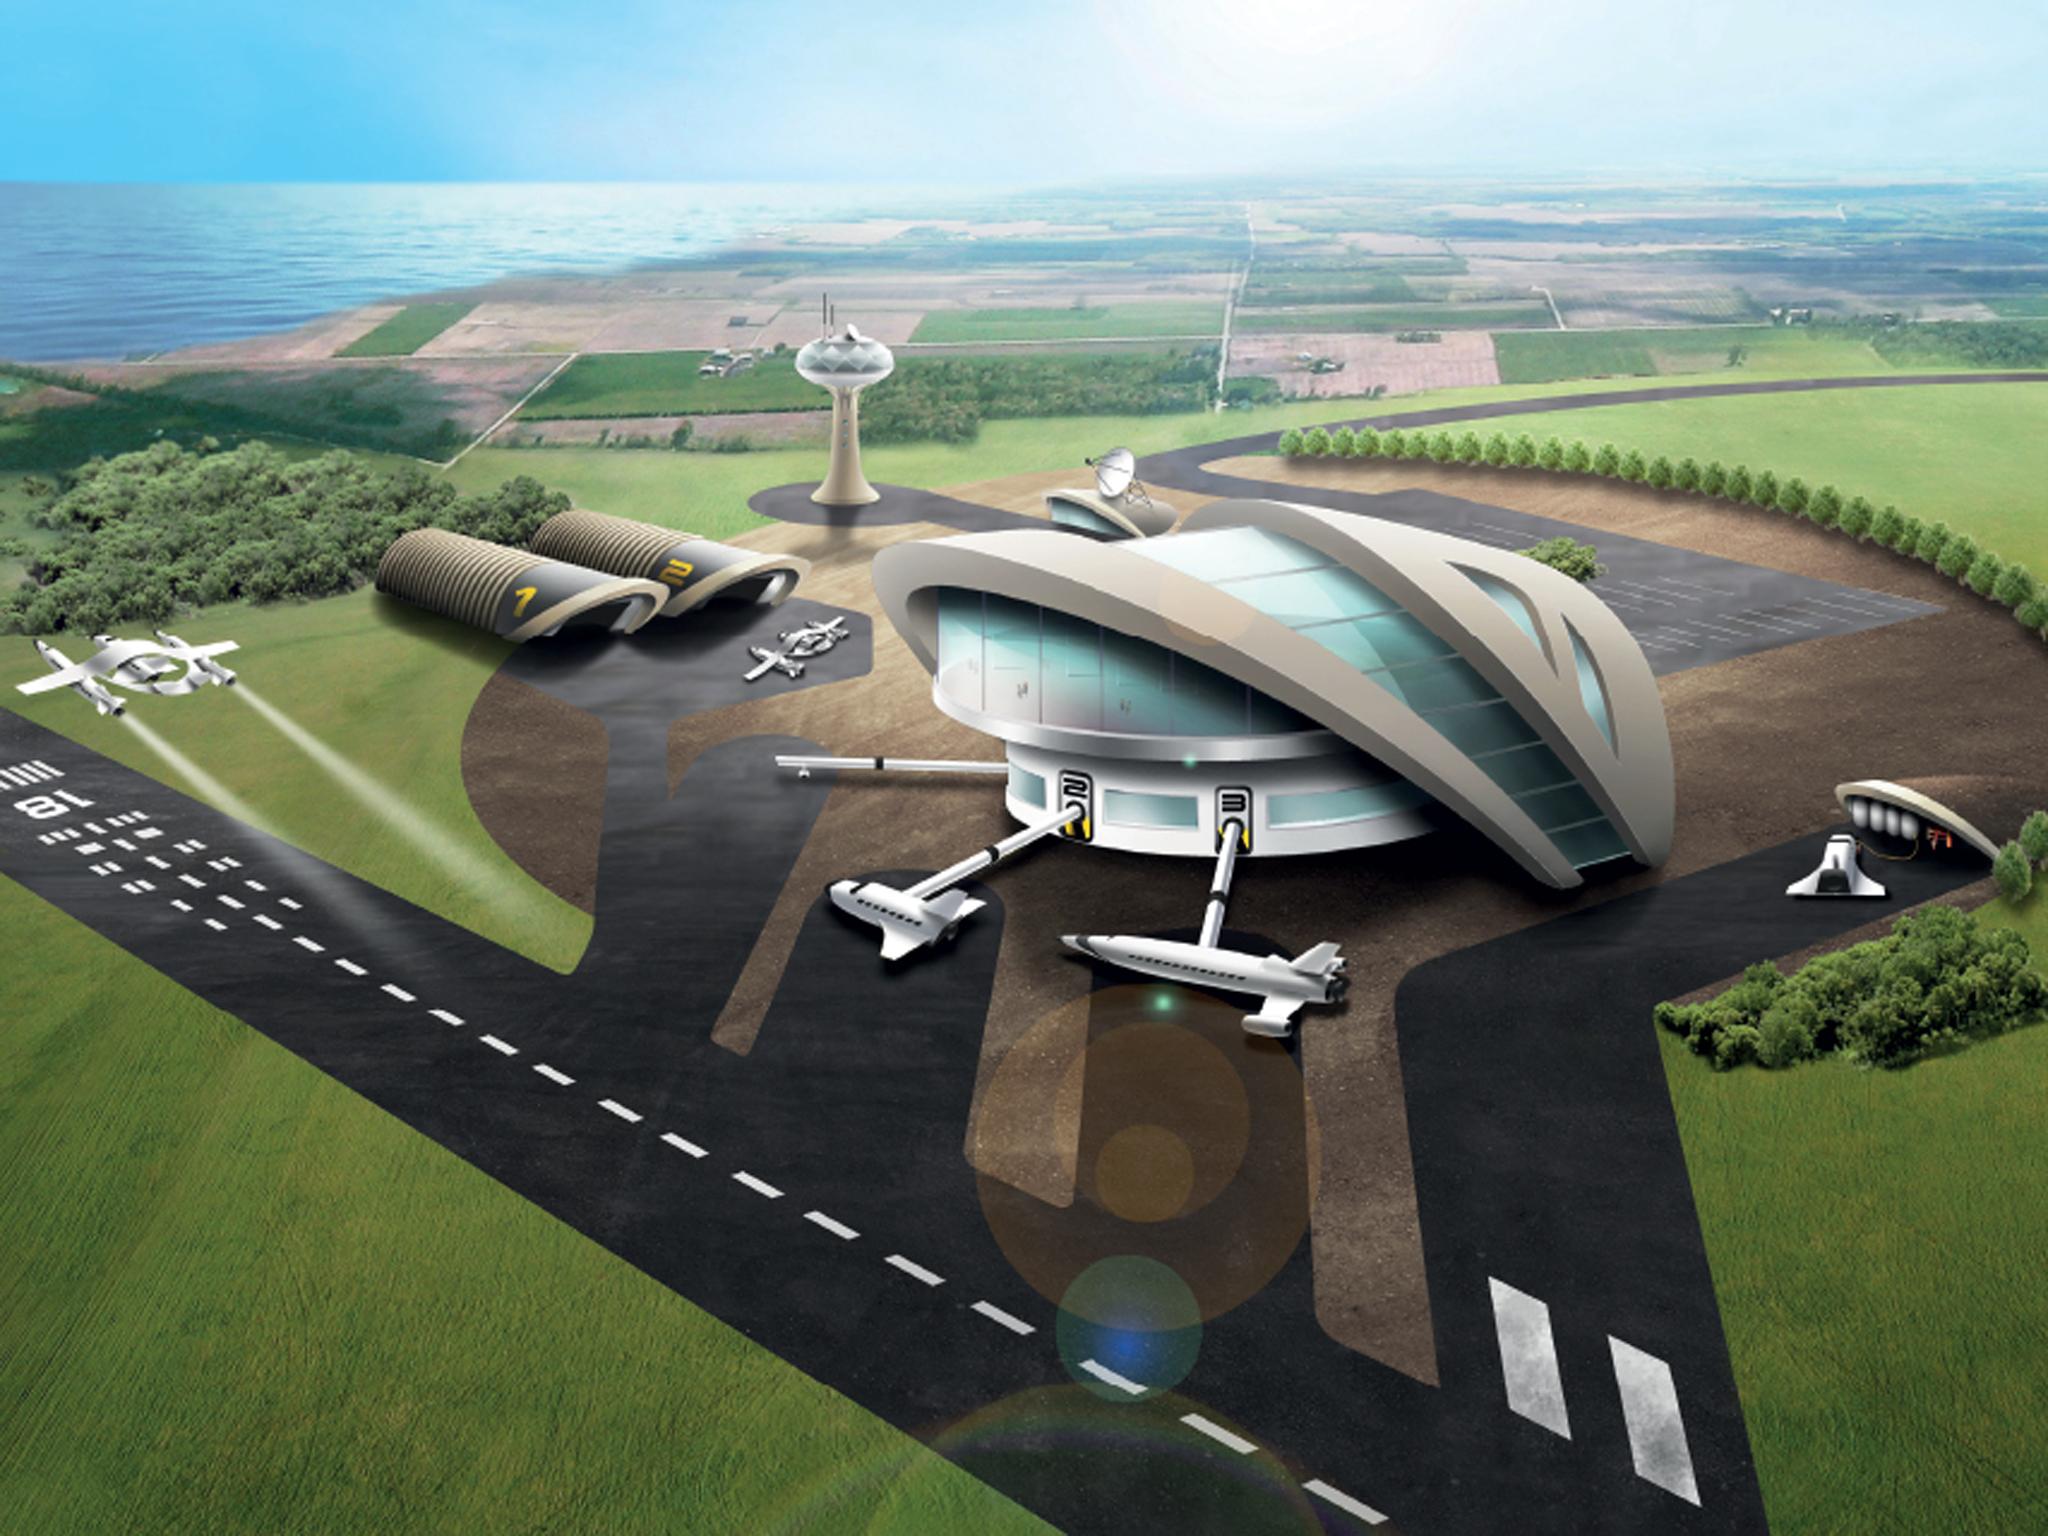 The potential spaceport, as drawn in a Government illustration